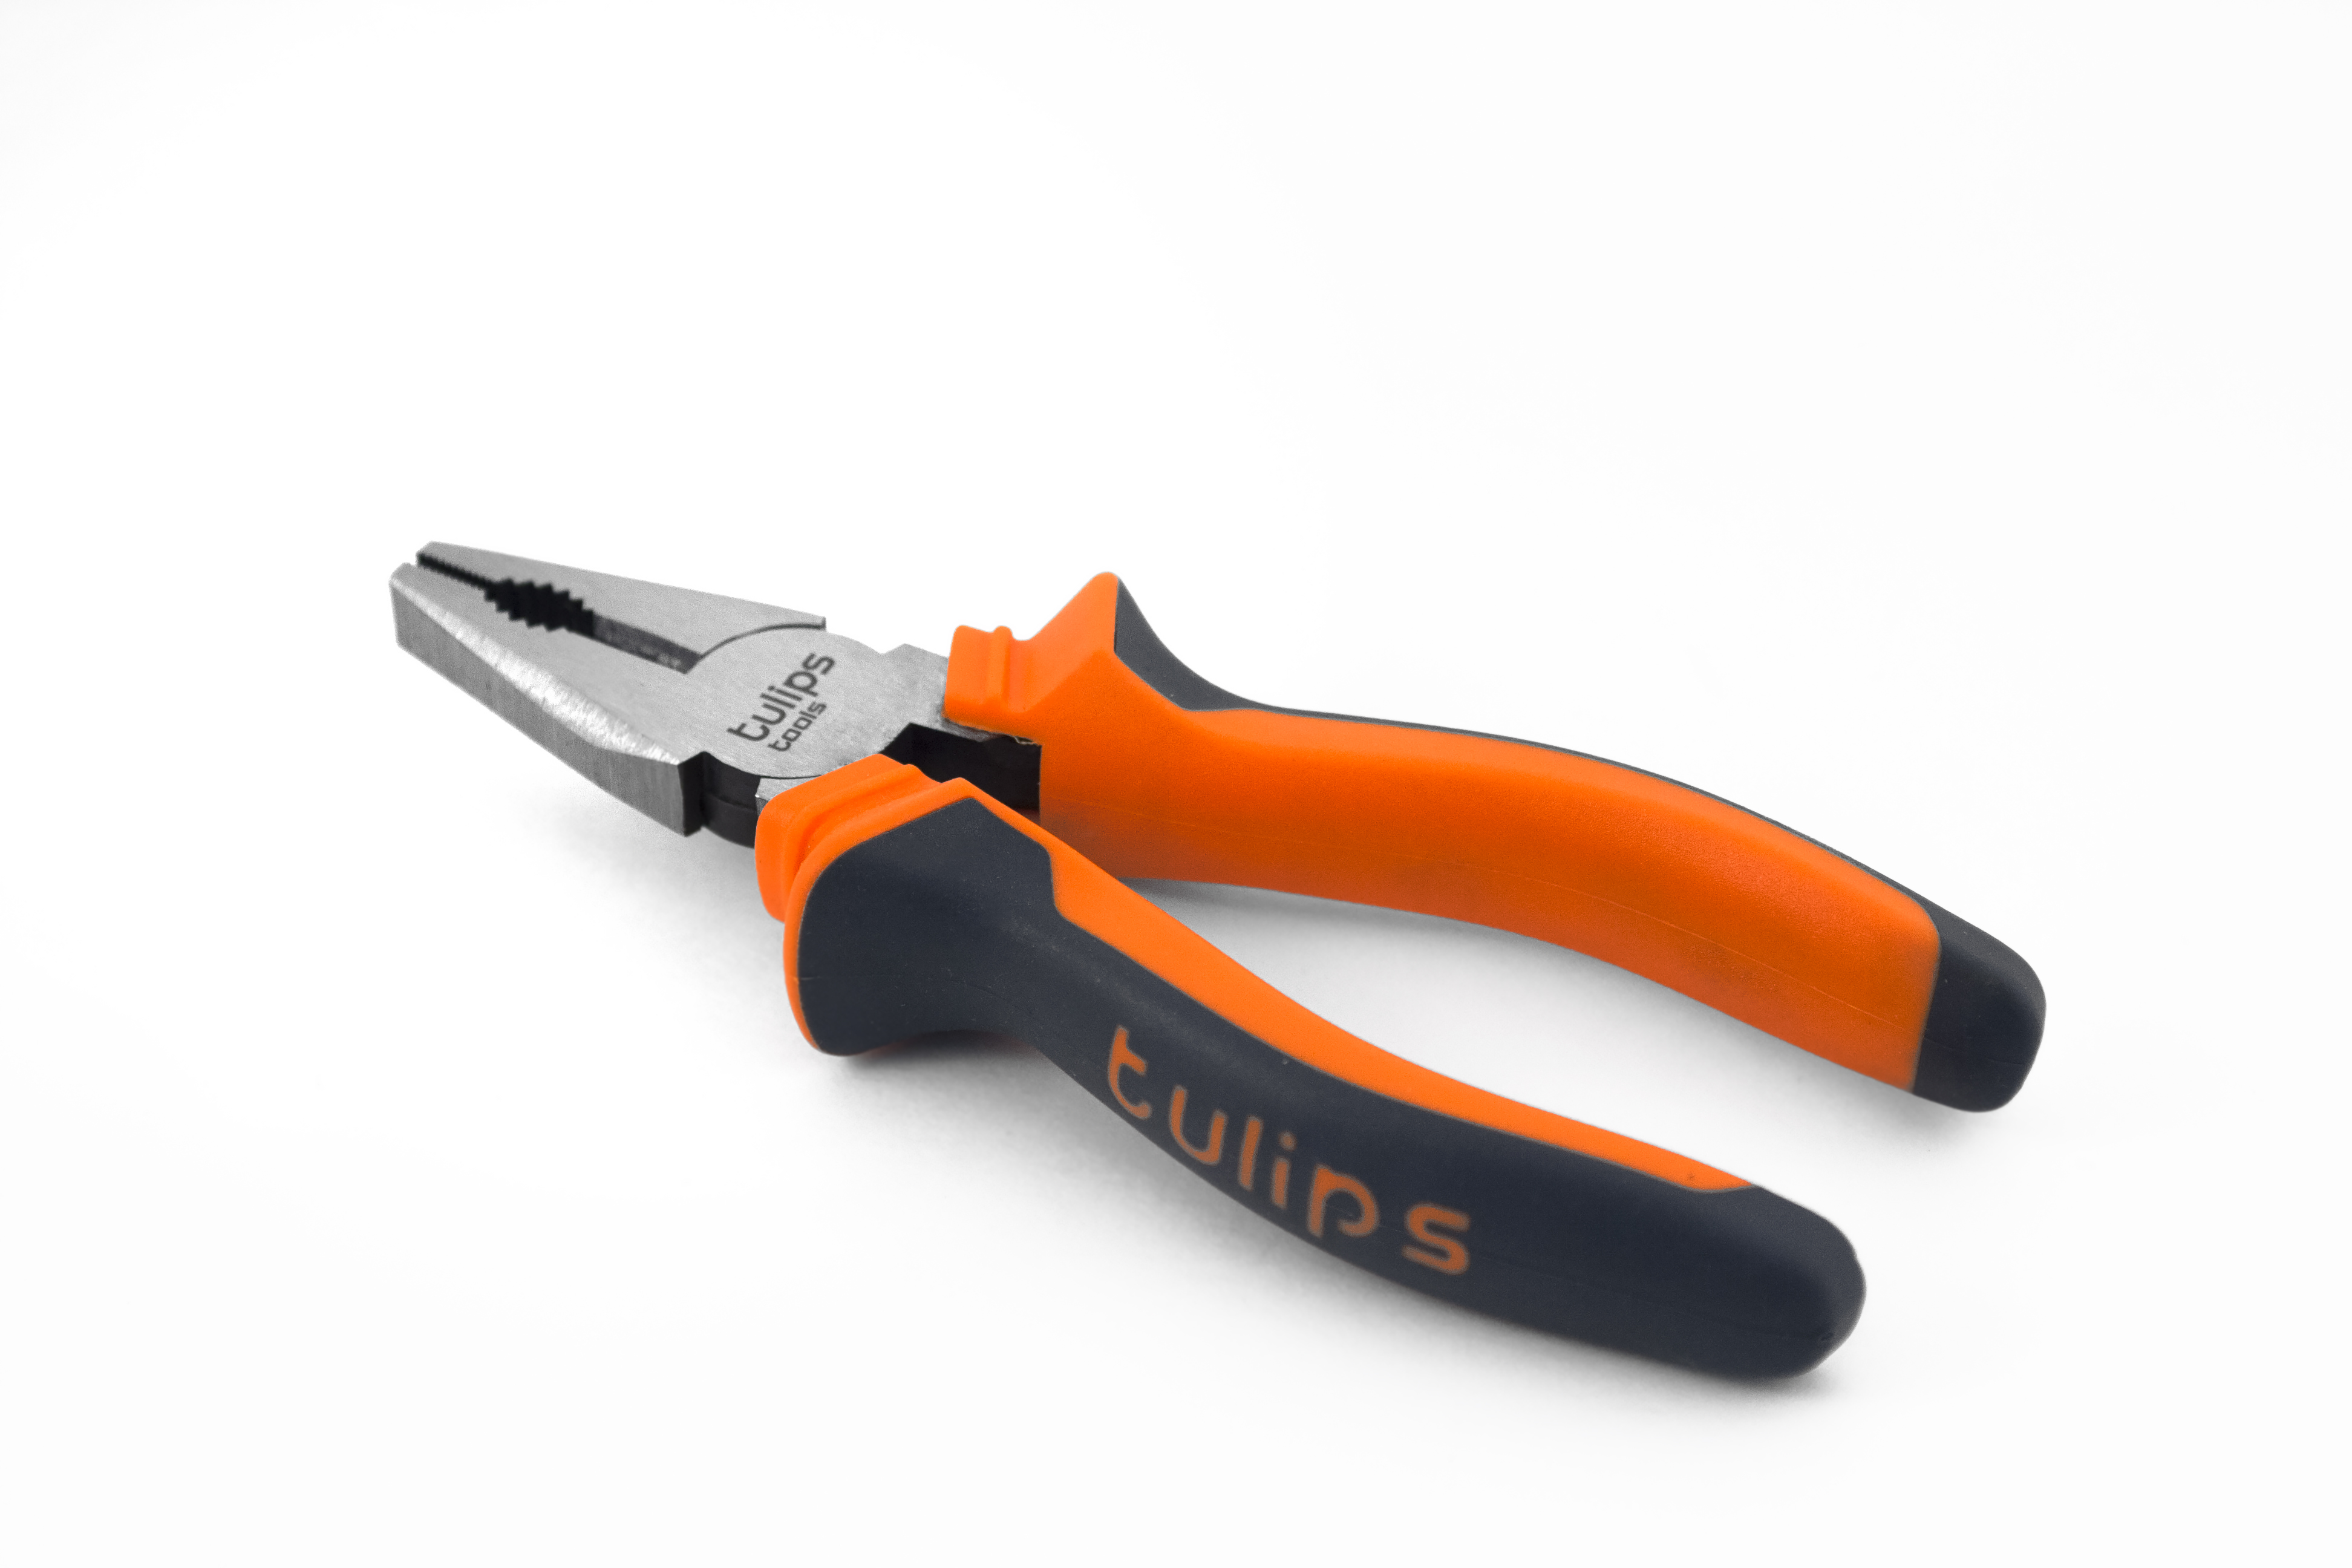  Tulips tools - Tulips tools<br> (): 160,<br>: ,<br> : CrV,<br> : <br>